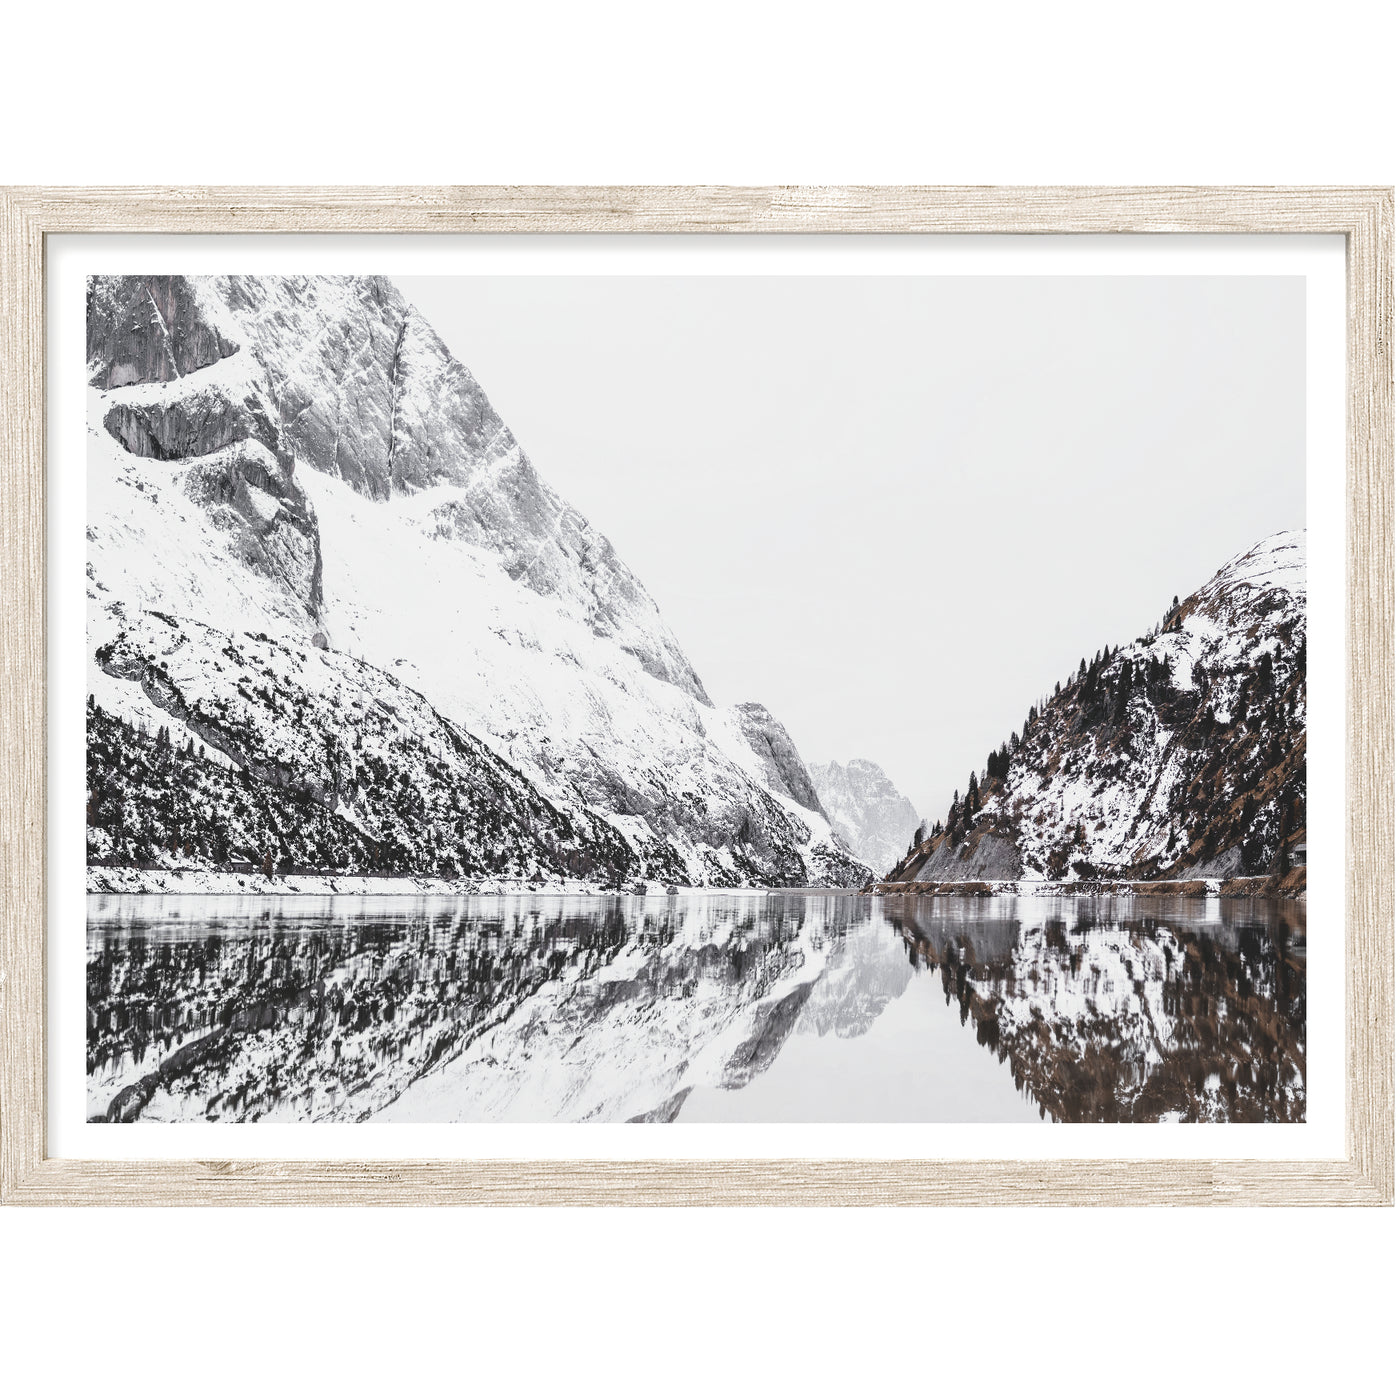 Lake by The Mountains Wall Art, Landscape Photography Print, Large Wall Decor | arrtopia